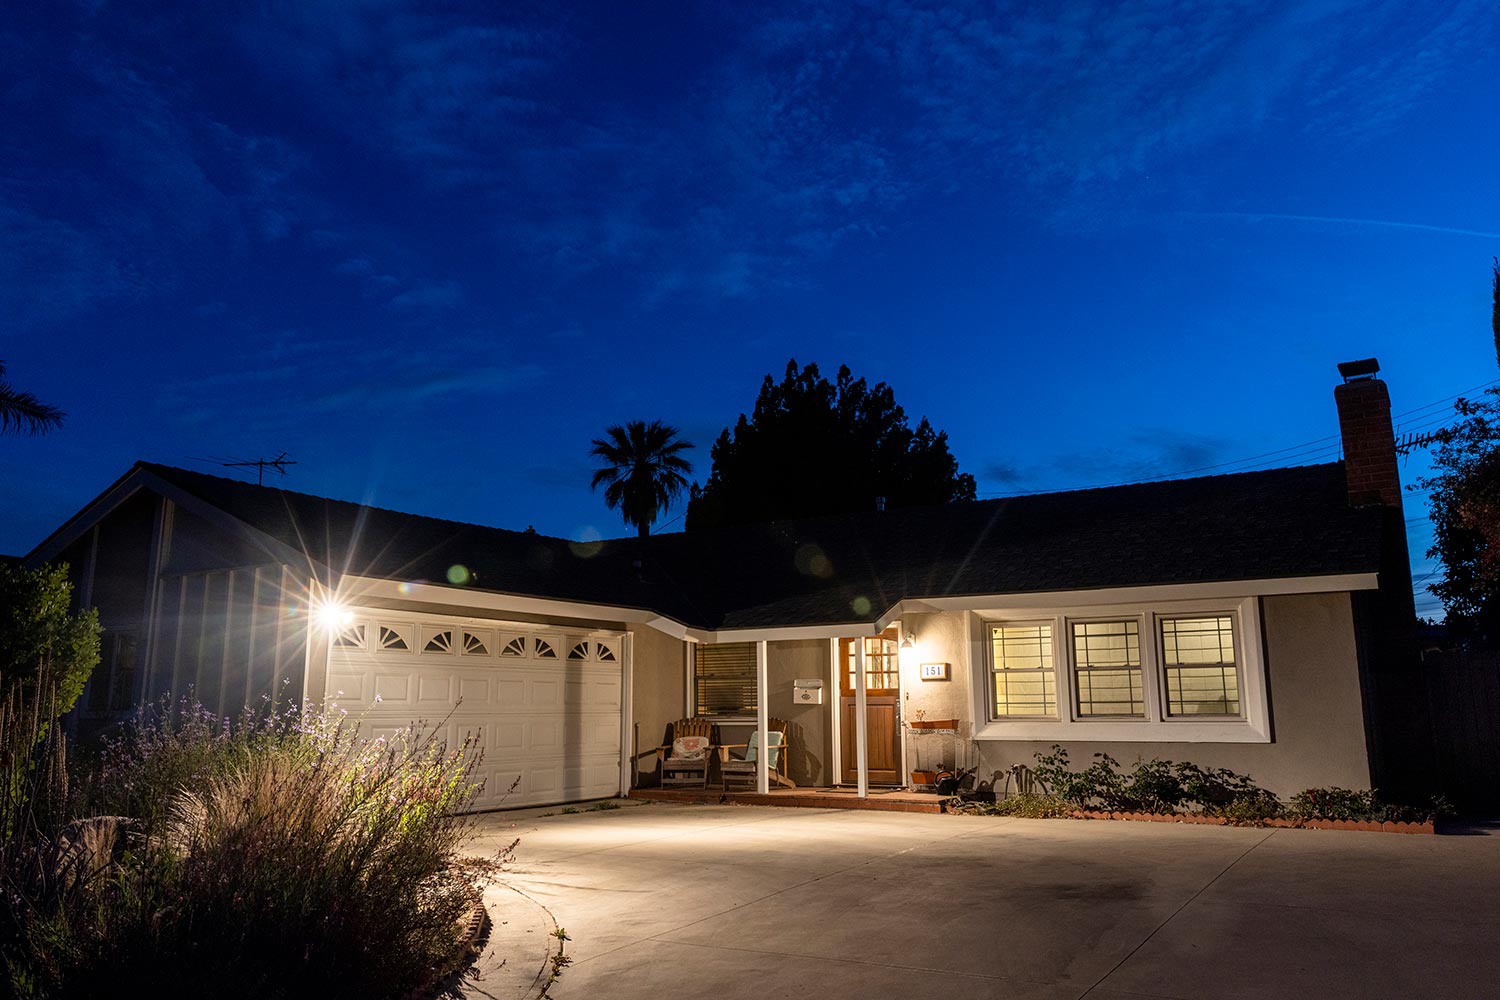 Residential home in southern California at twilight